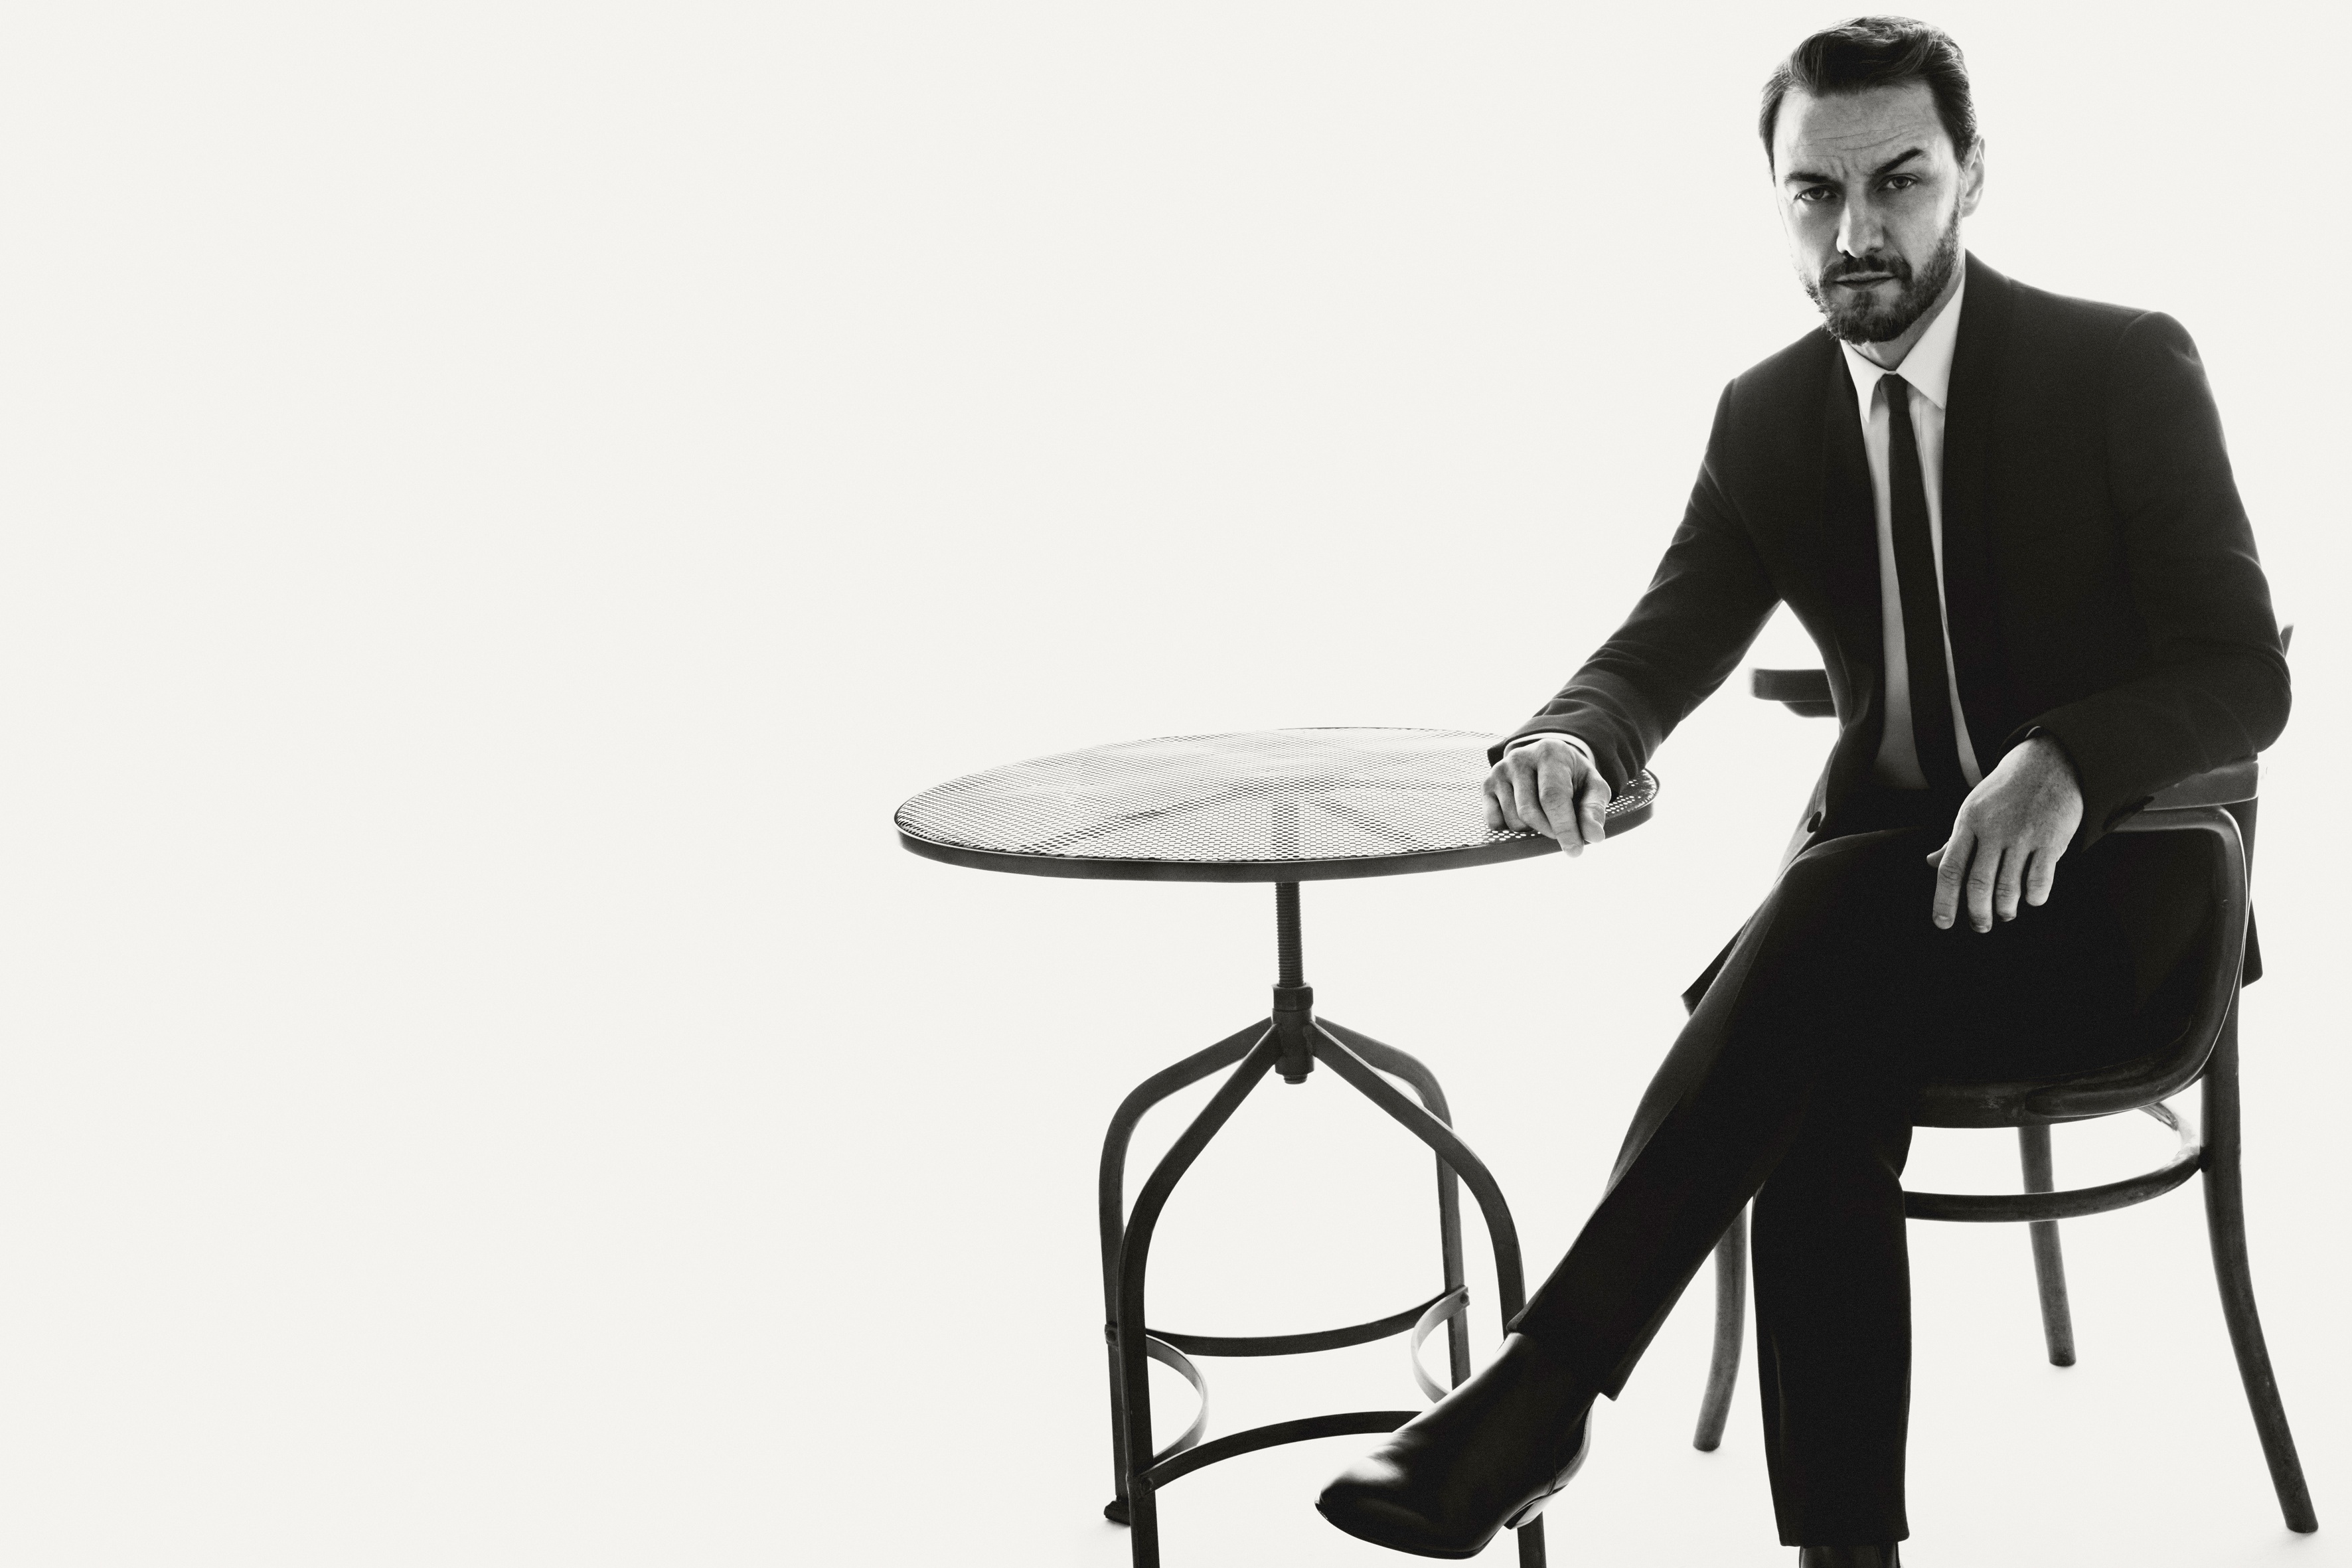 2017Men___Male_Celebrity_Actor_James_McEvoy_sits_on_a_chair_at_a_table_in_black_and_white_phot...jpg